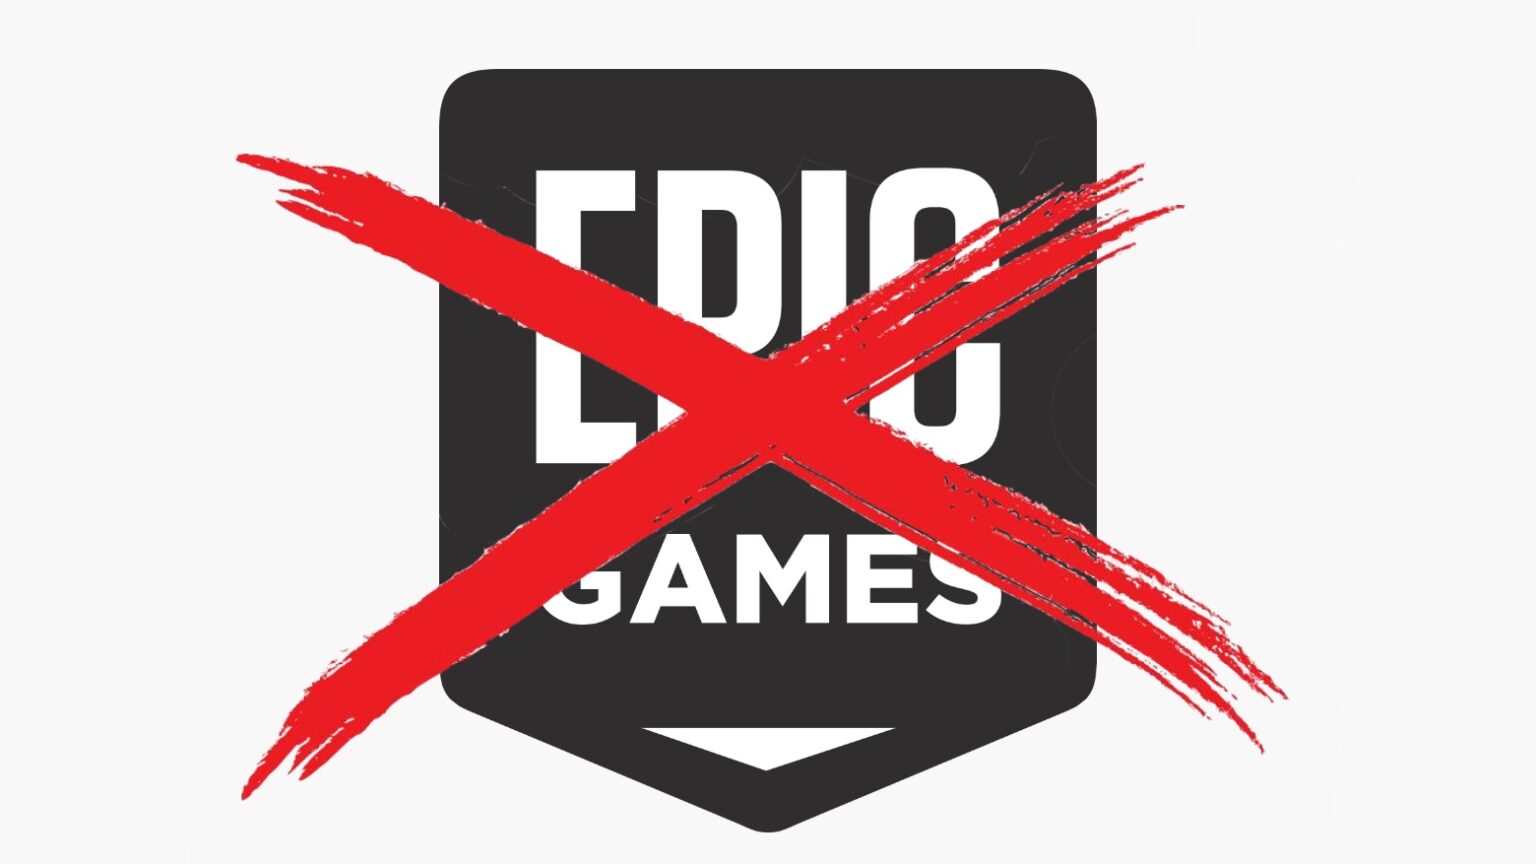 Apple cancelled Epic Games account on the App Store.